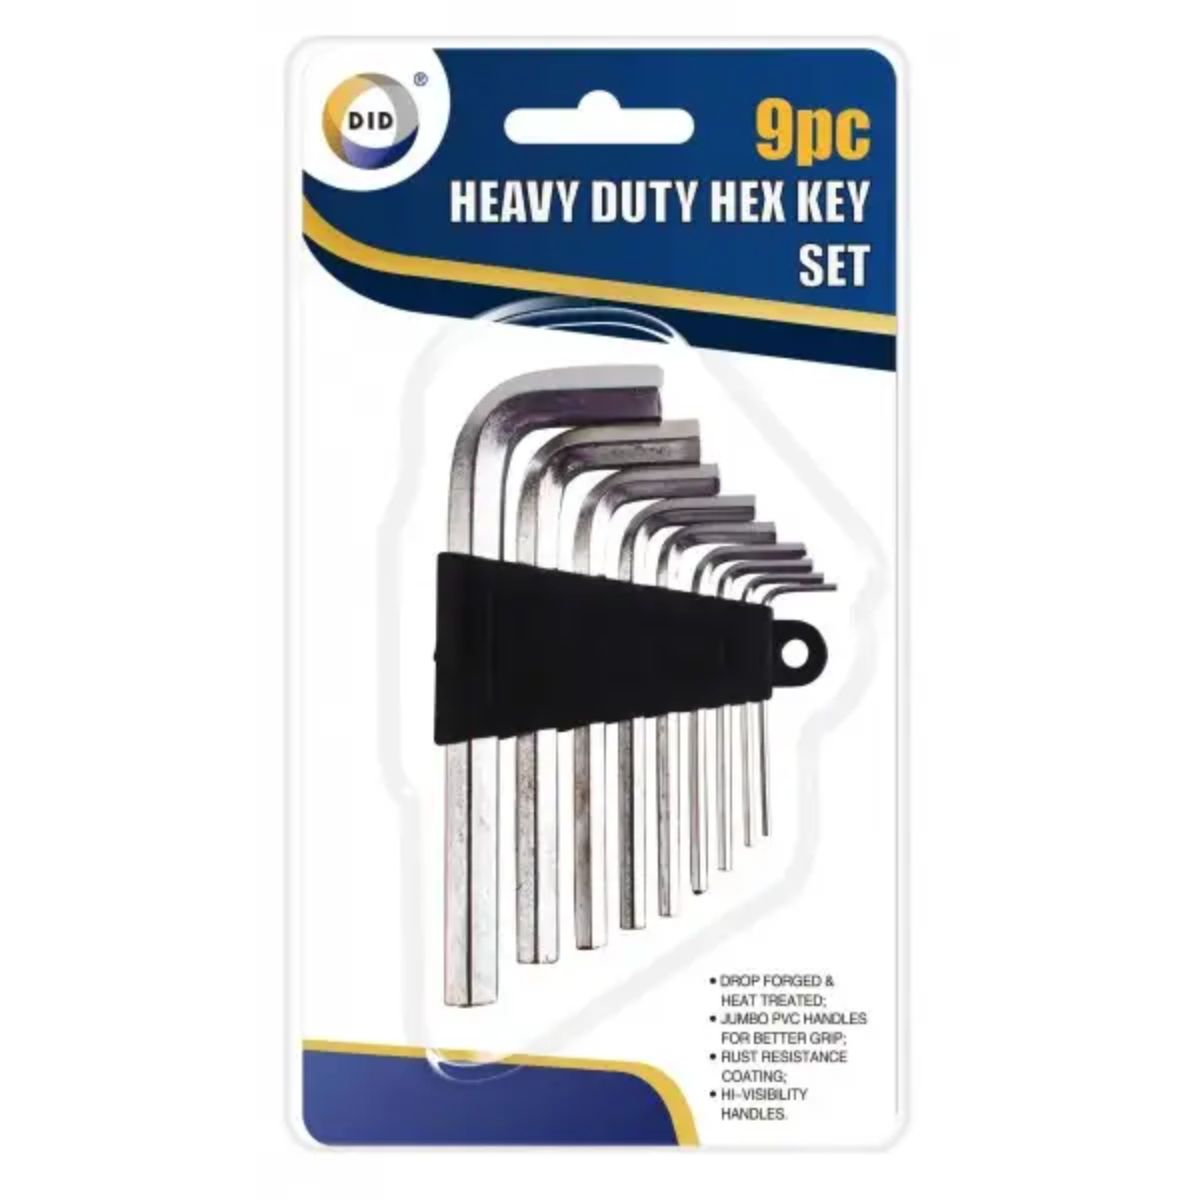 Packaged DID - Heavy Duty Hex Key Set - 9pcs on a retail card, featuring various sizes of allen wrenches with black handles.